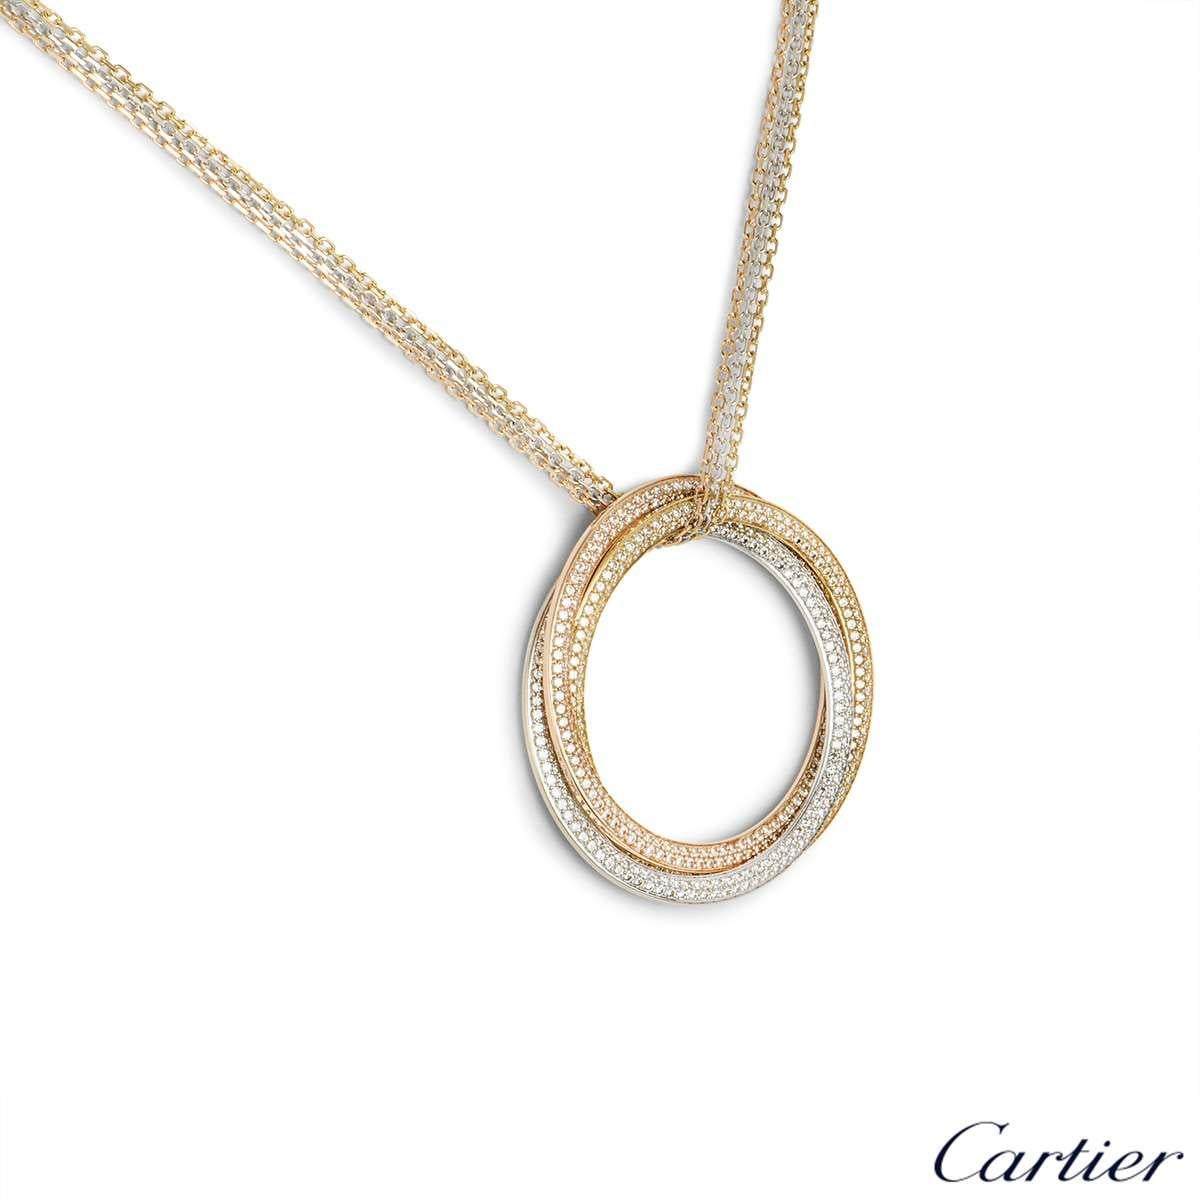 An alluring 18k tri-colour gold diamond large necklace by Cartier from the Trinity De Cartier collection. The necklace is composed of three open work circular motifs entwining in yellow, white and rose gold set with pave round brilliant cut diamonds